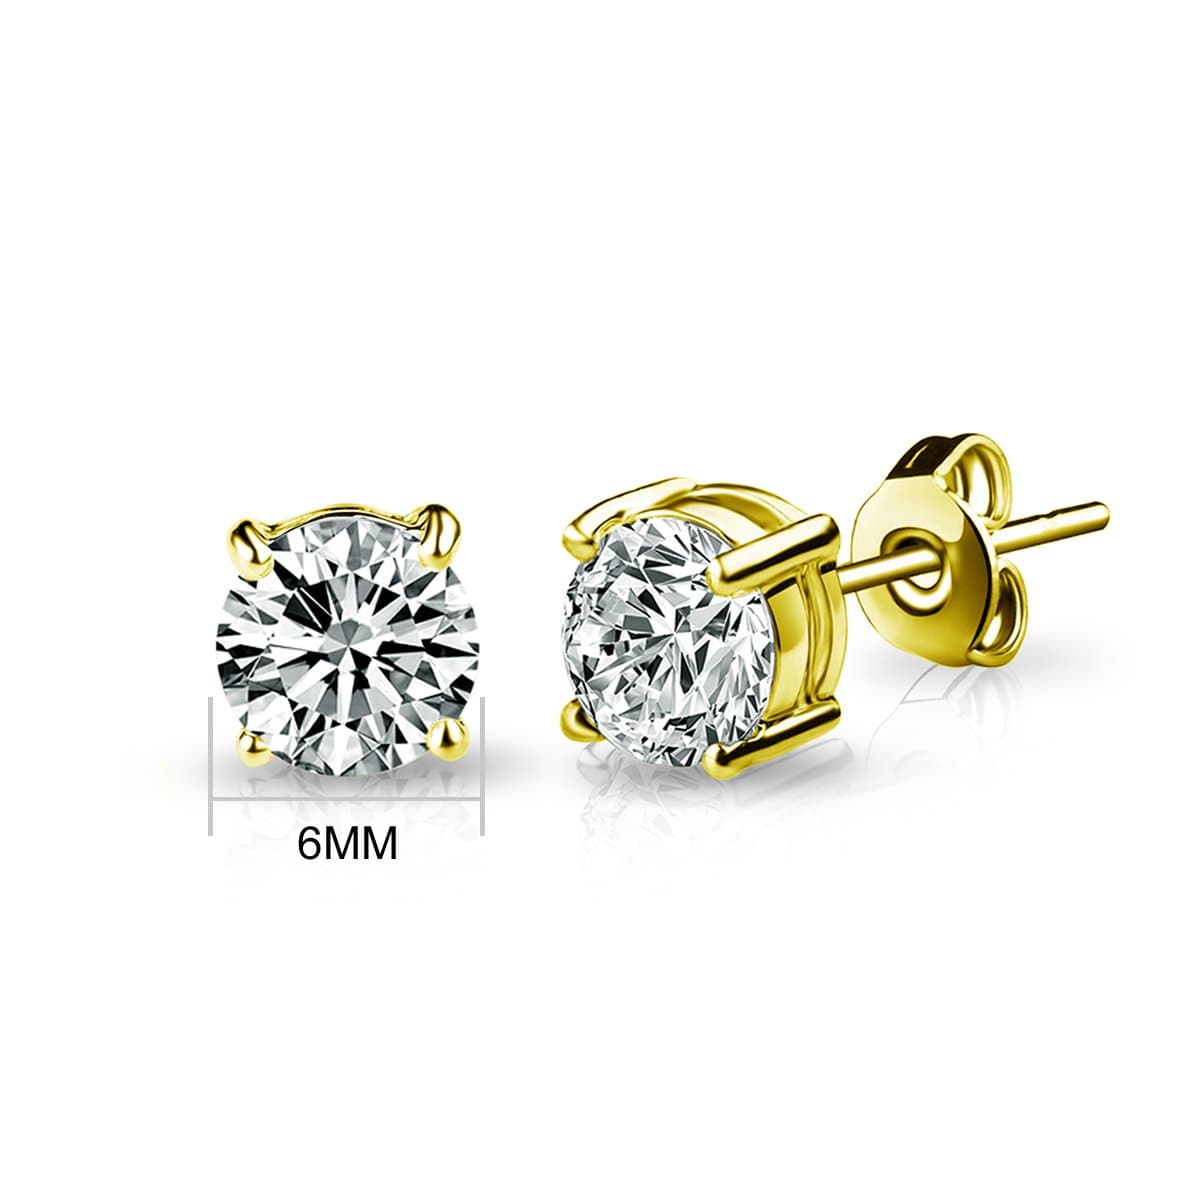 Gold Plated Solitaire Crystal Stud Earrings Created with Zircondia® Crystals